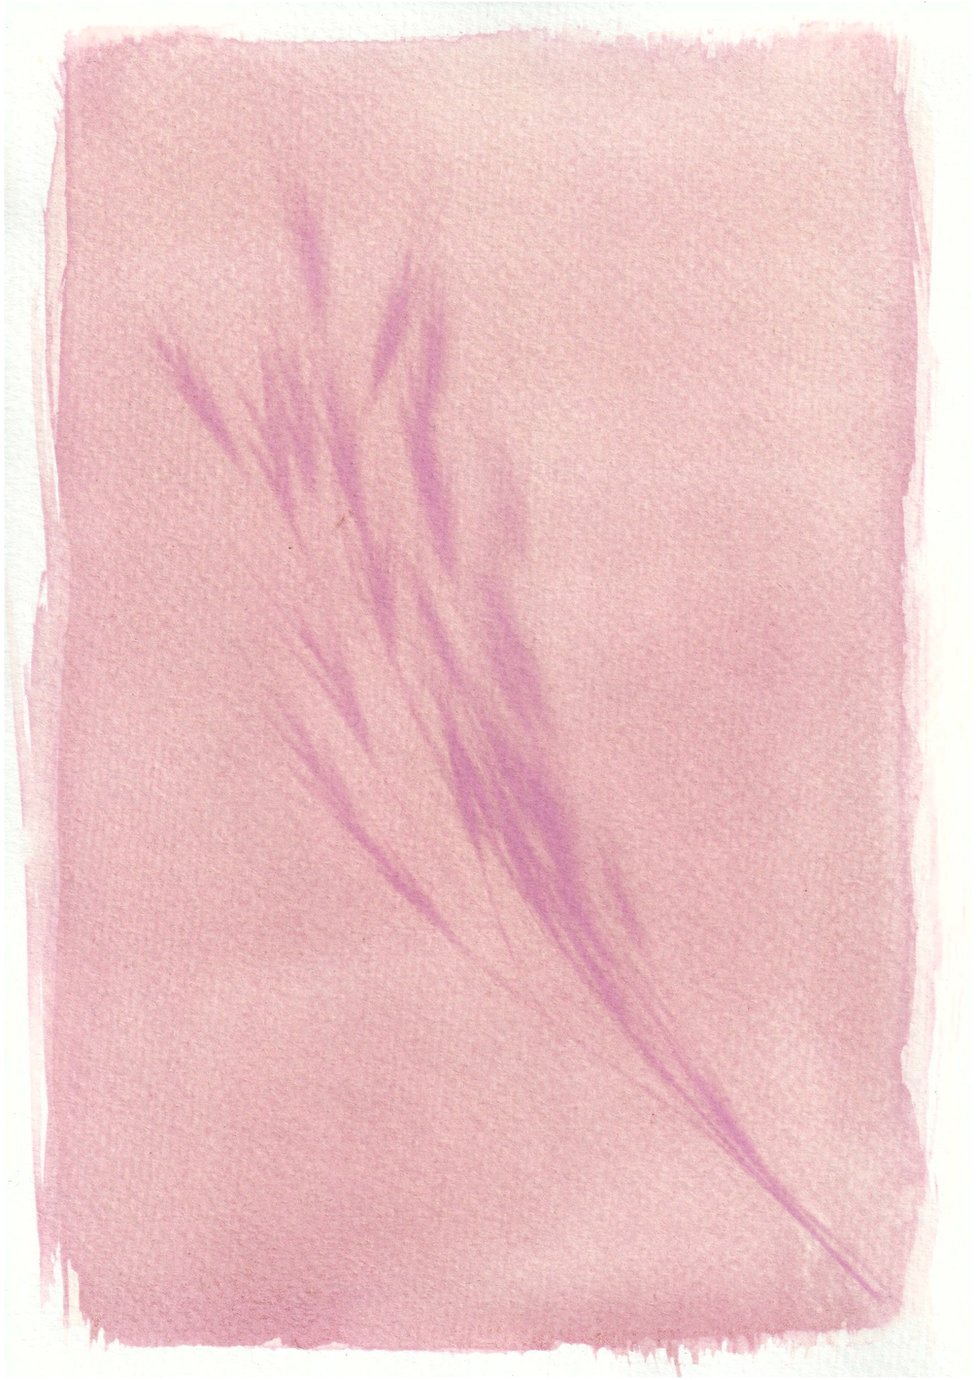 An anthotype print of a purple piece of plant foliage